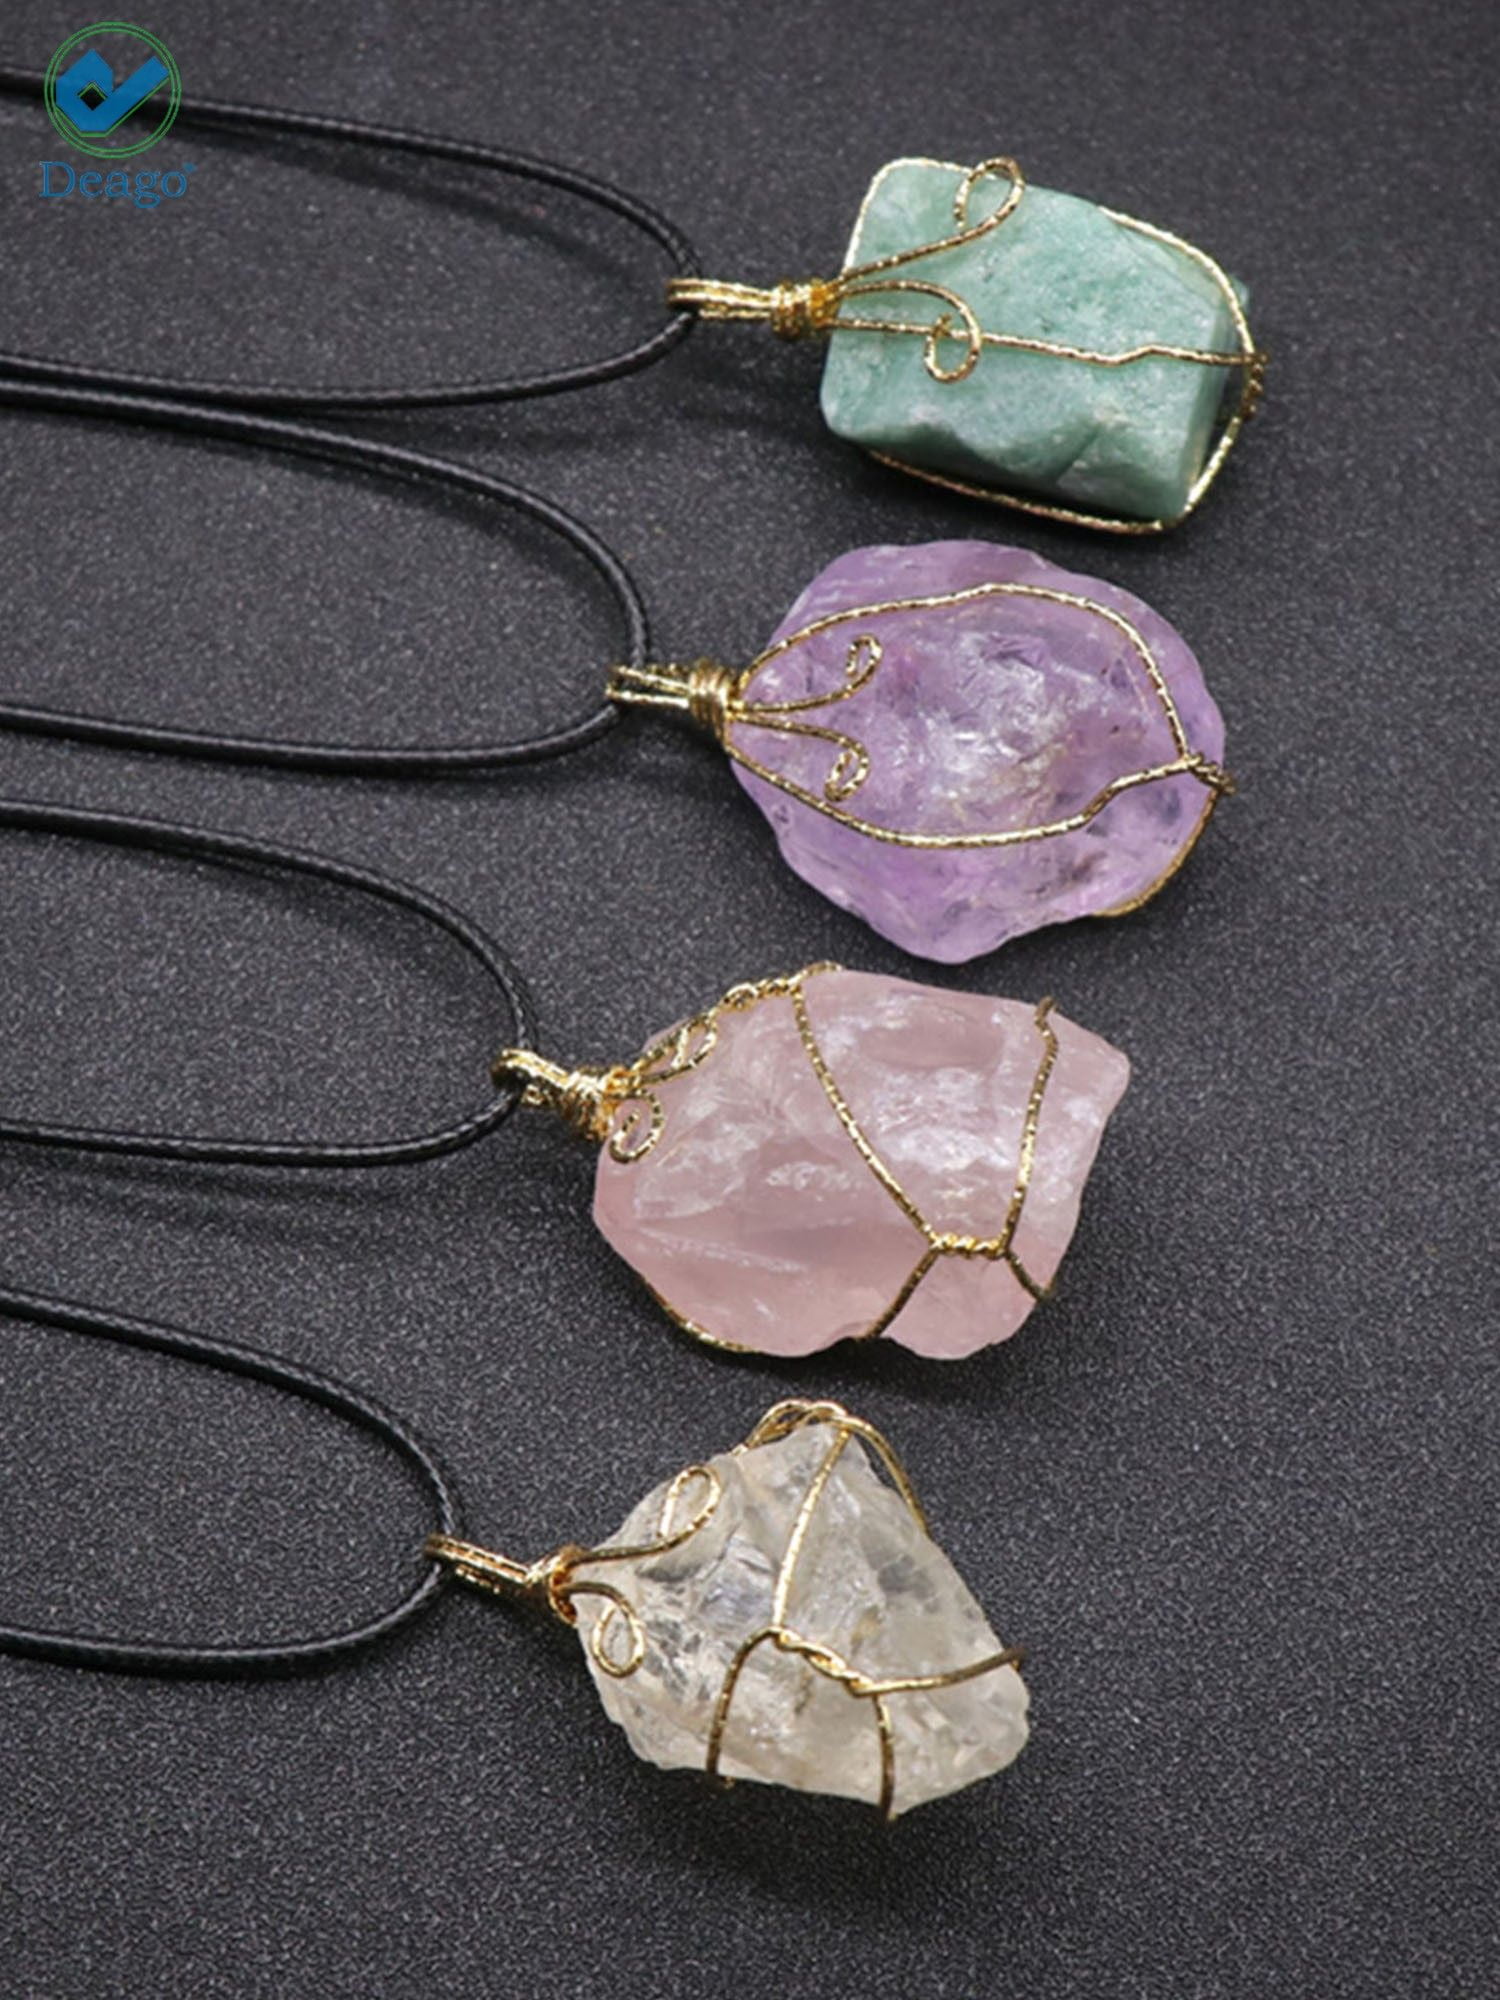 Crystal Stone Necklace Crystal Necklace Gold Necklace White Crystal Necklace Stone Necklace